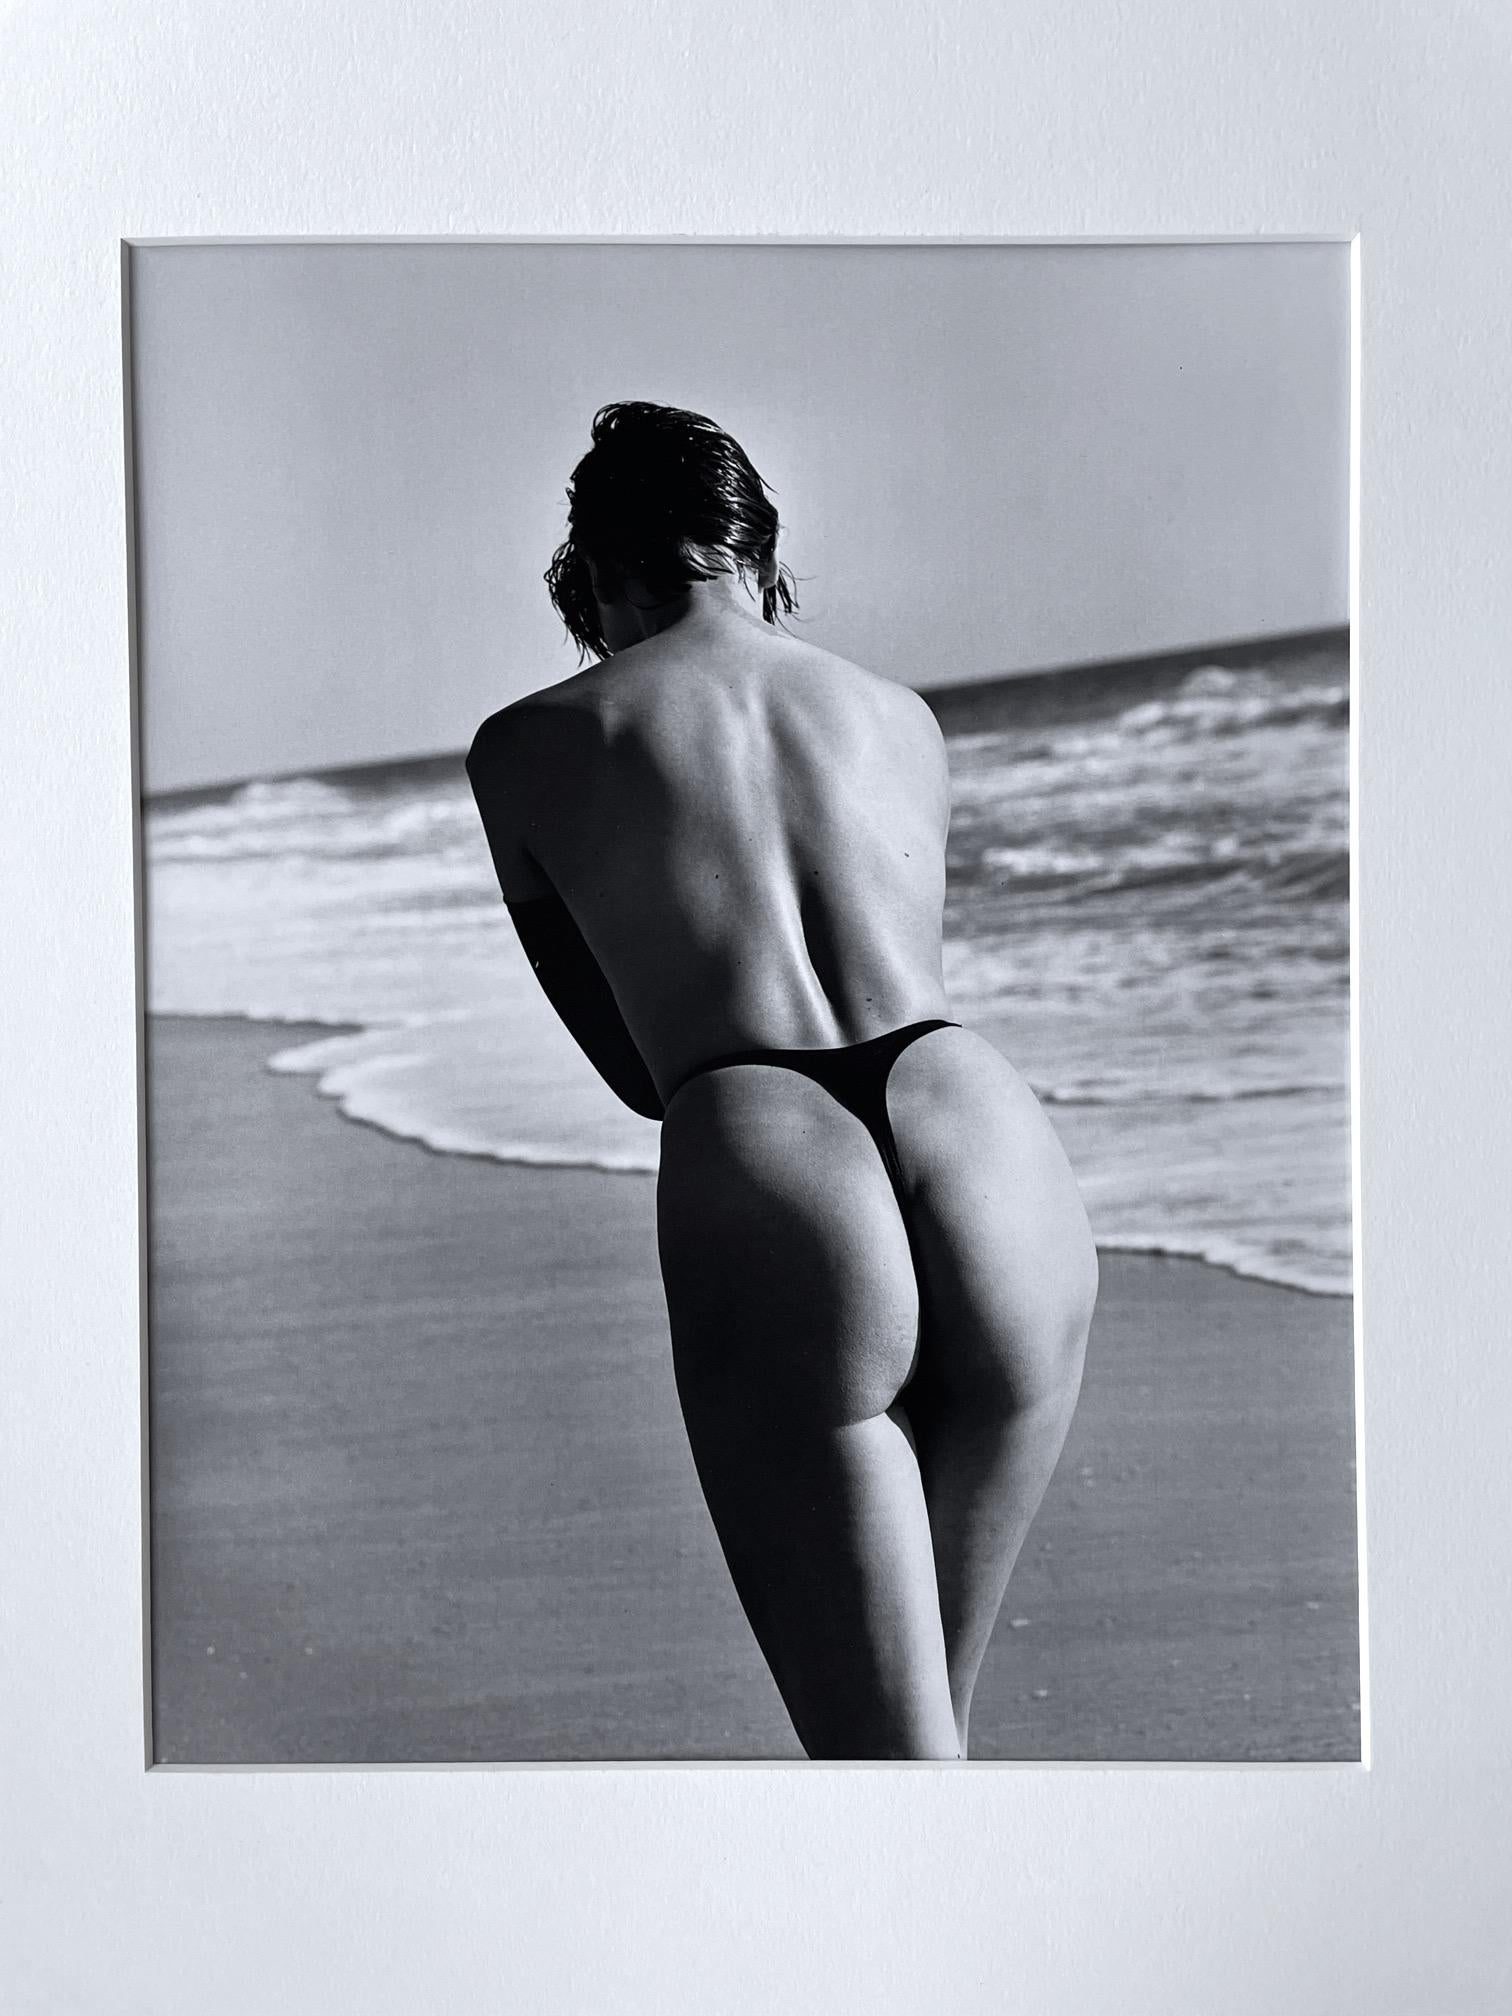 Herb Ritts Black and White Photograph - Untitled - Woman's Back In Bikini Bottom At Beach 